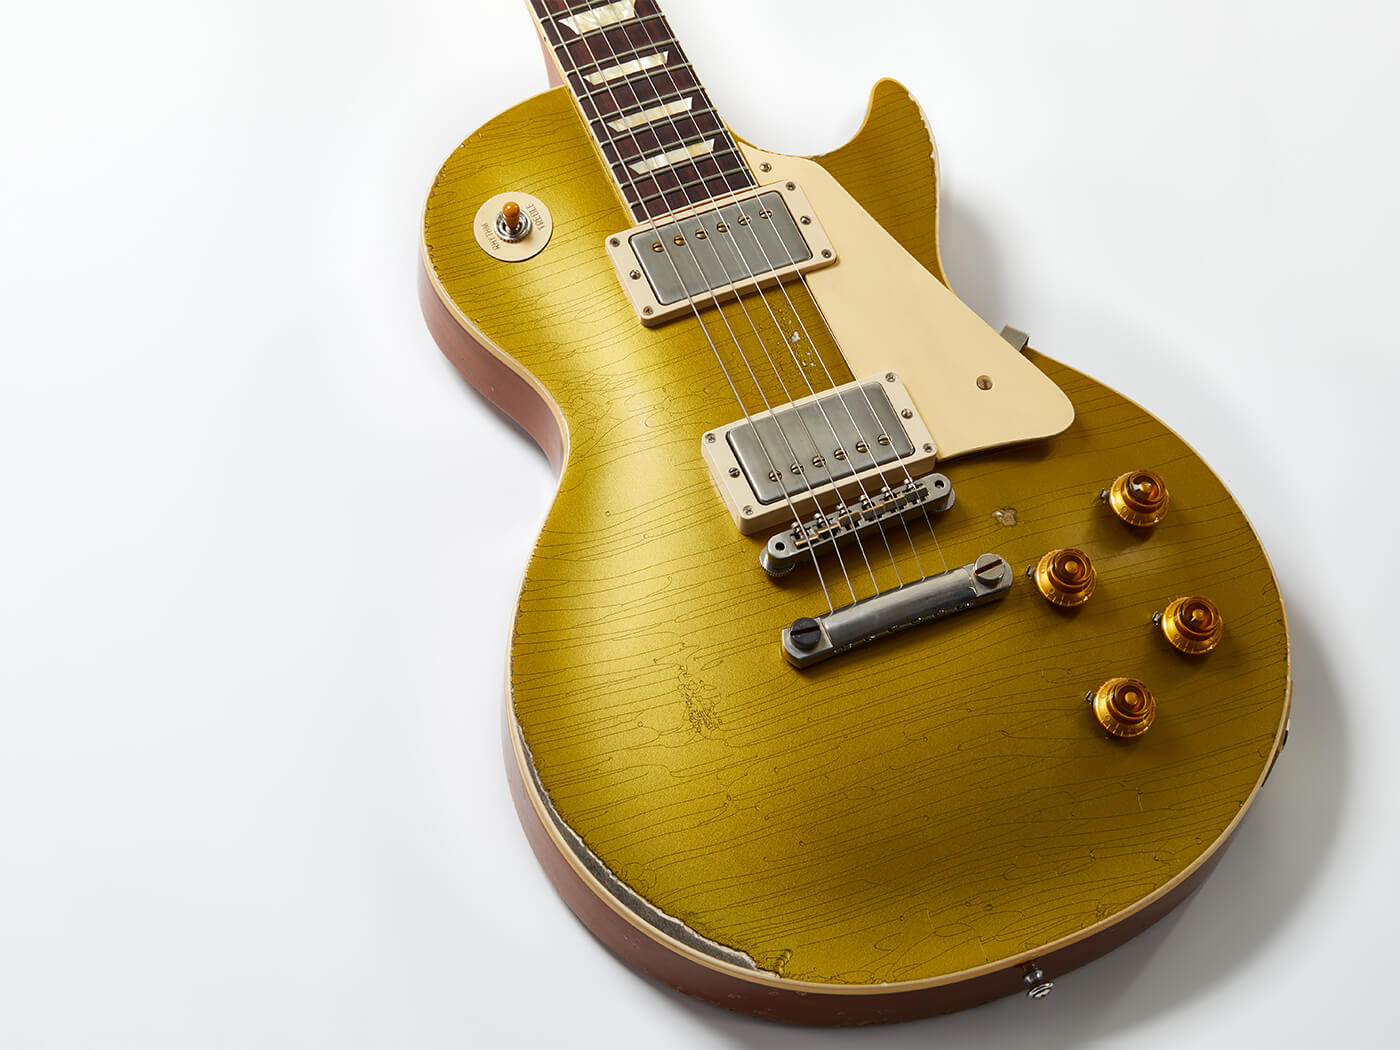 A brief history of Gibson